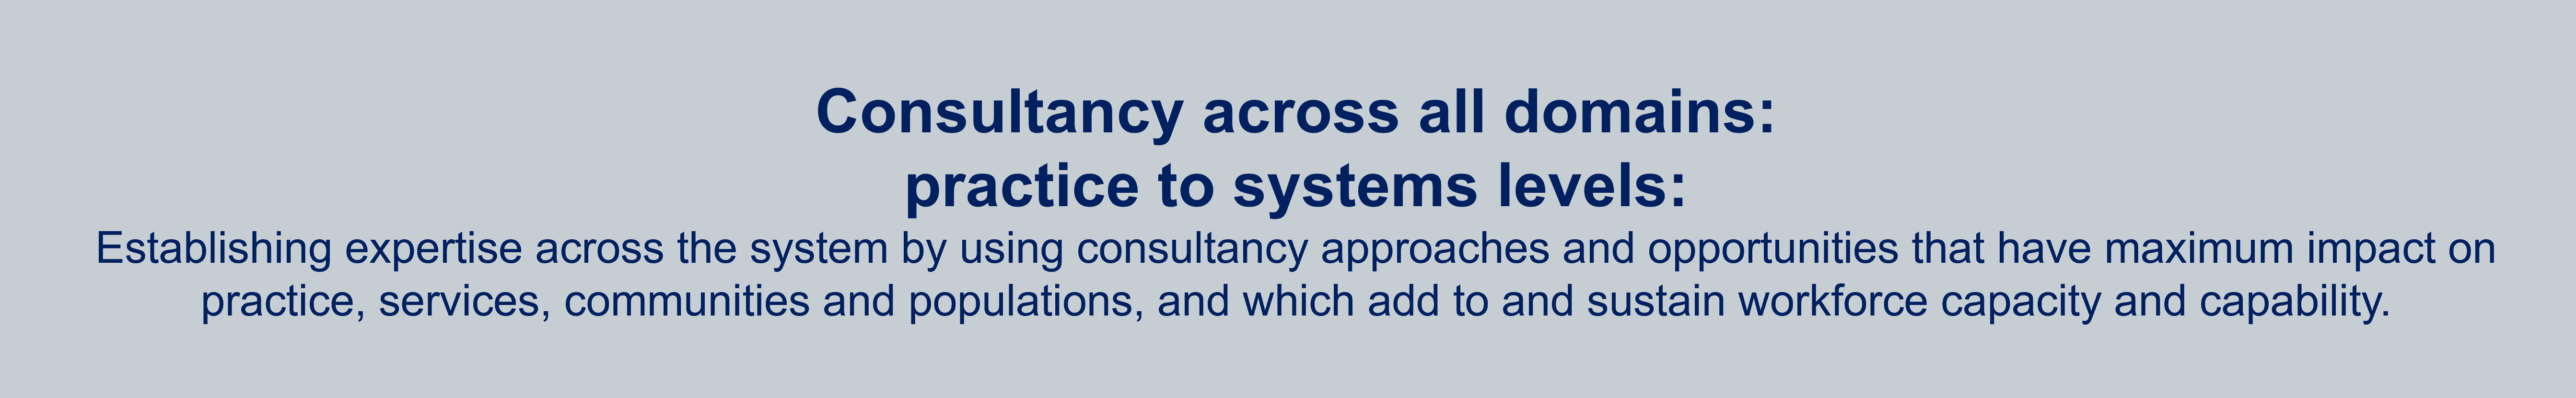 Consultancy across all domains: practice to systems levels:
Establishing expertise across the system by using consultancy approaches and opportunities that have maximum impact on practice, services, communities and populations, and which add to and sustain workforce capacity and capability.
